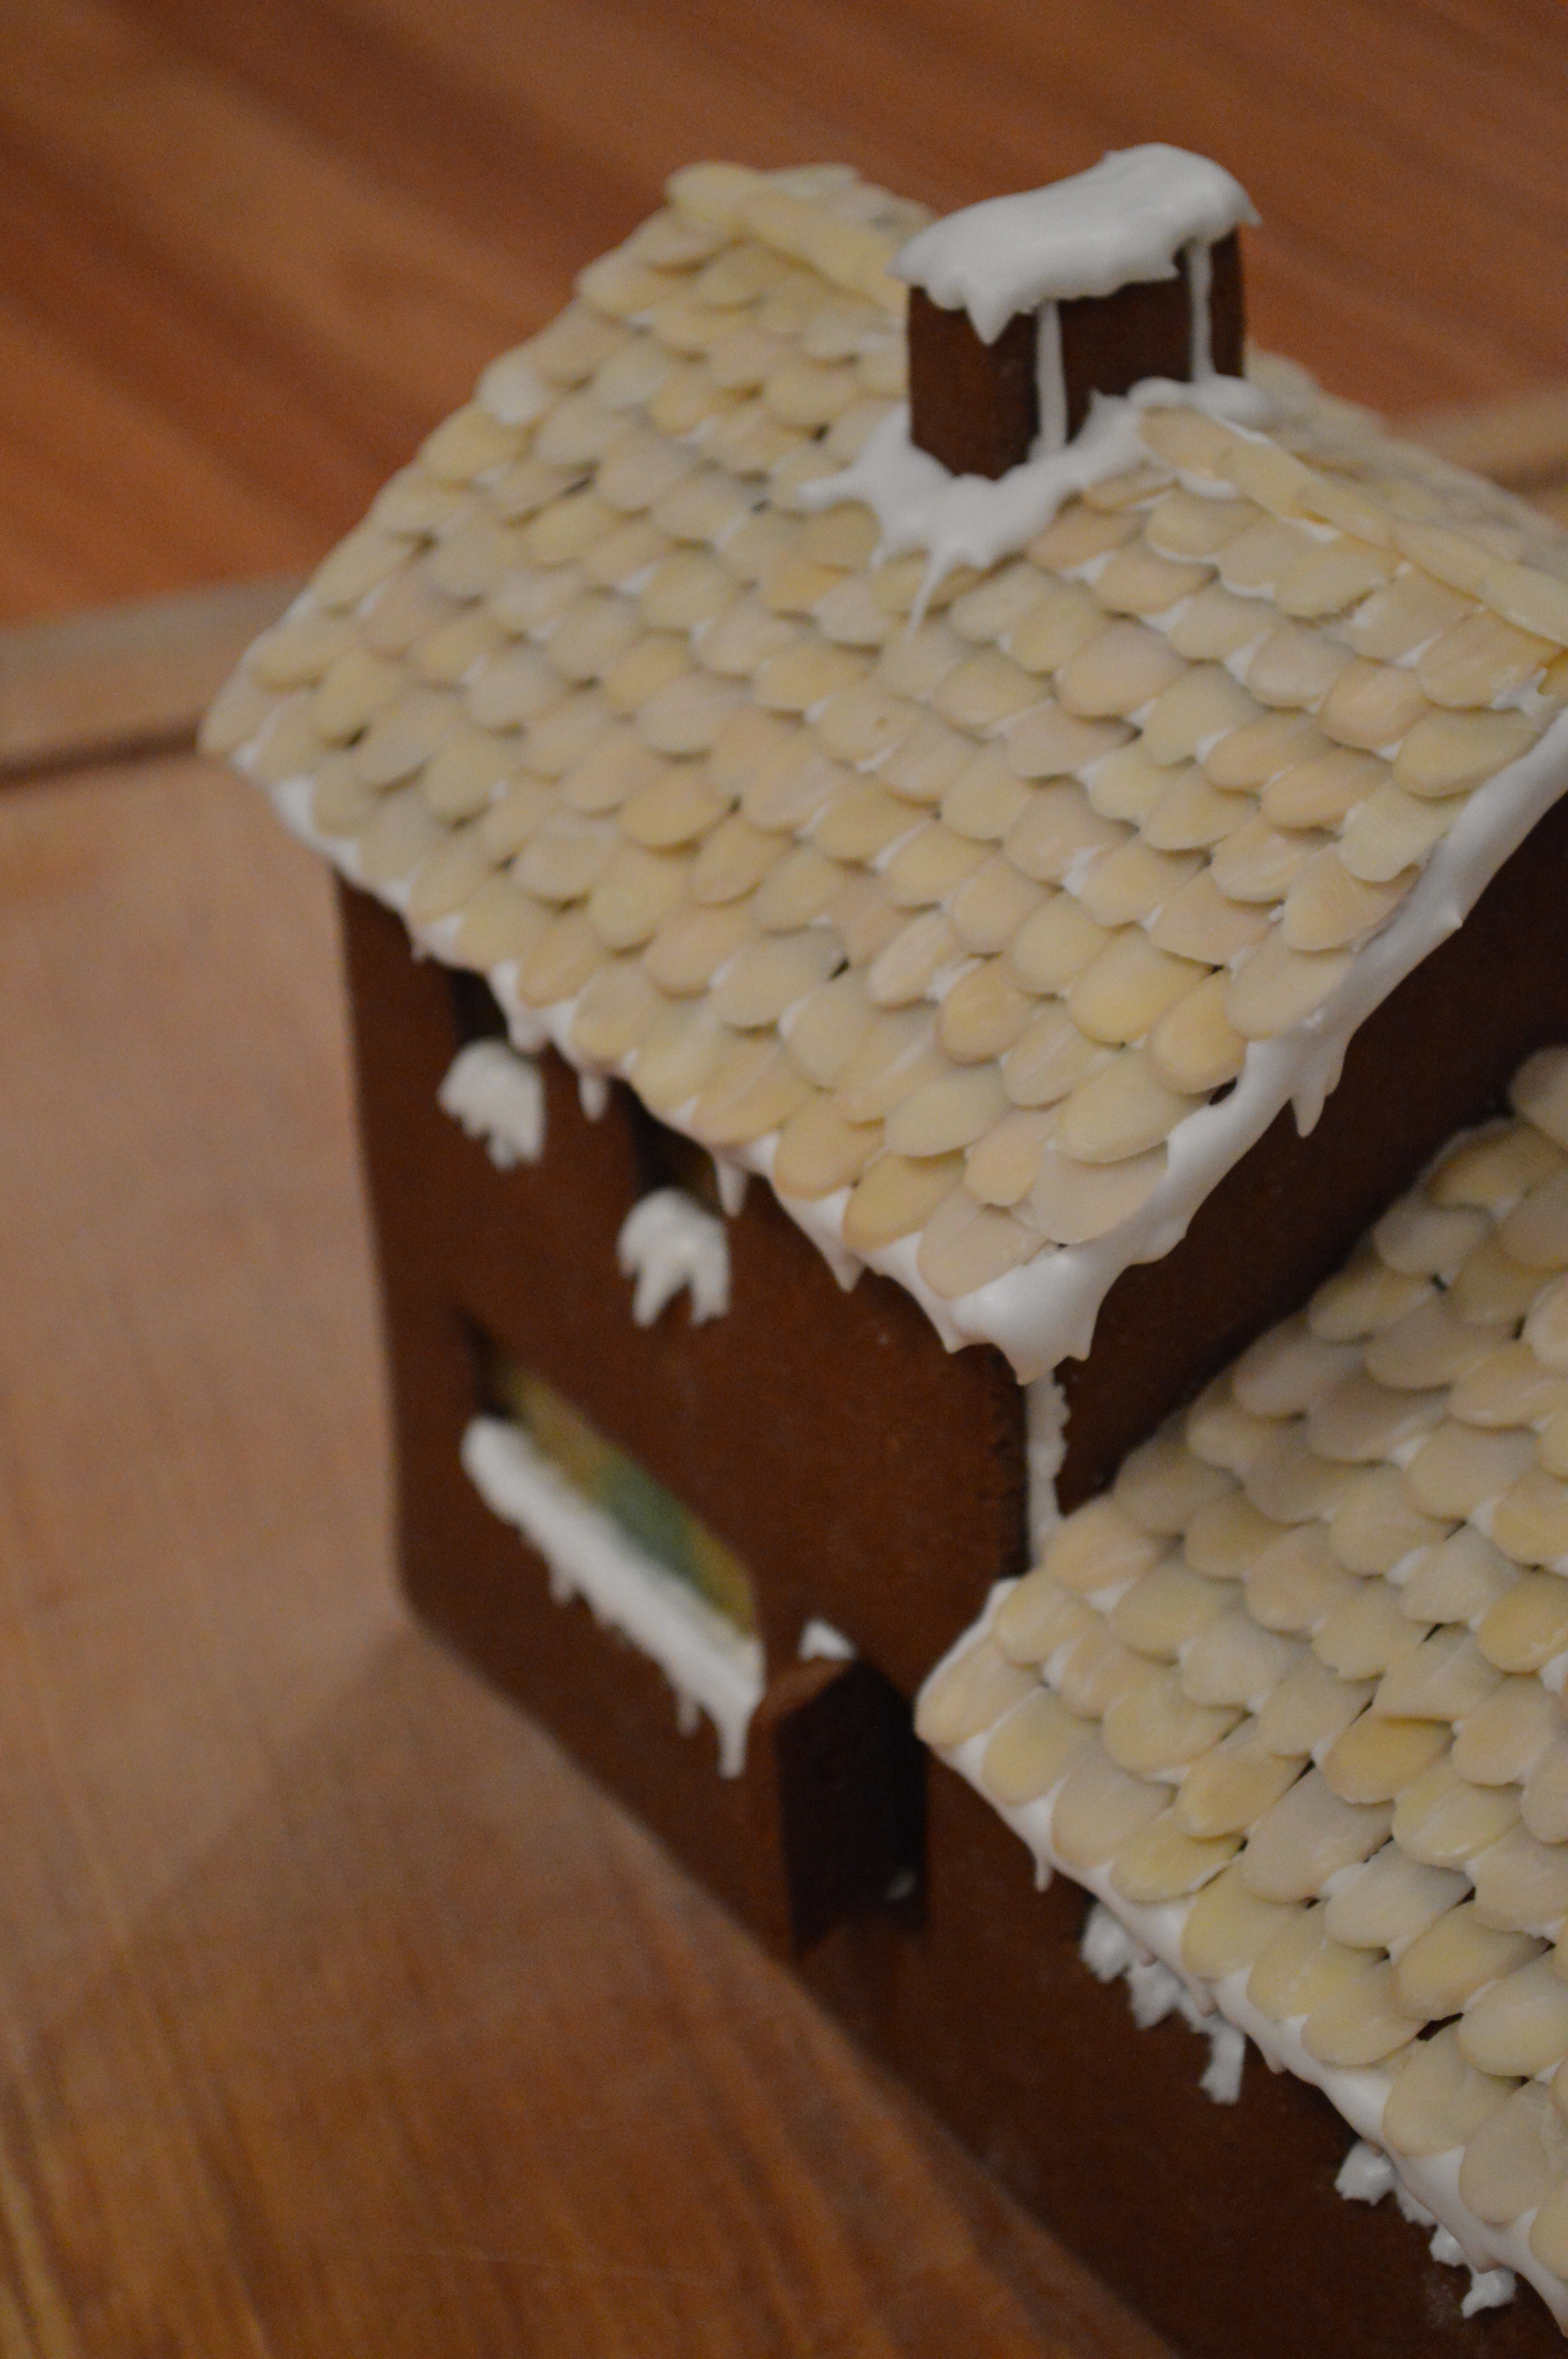 Royal icing used to mimic snow on a gingerbread house